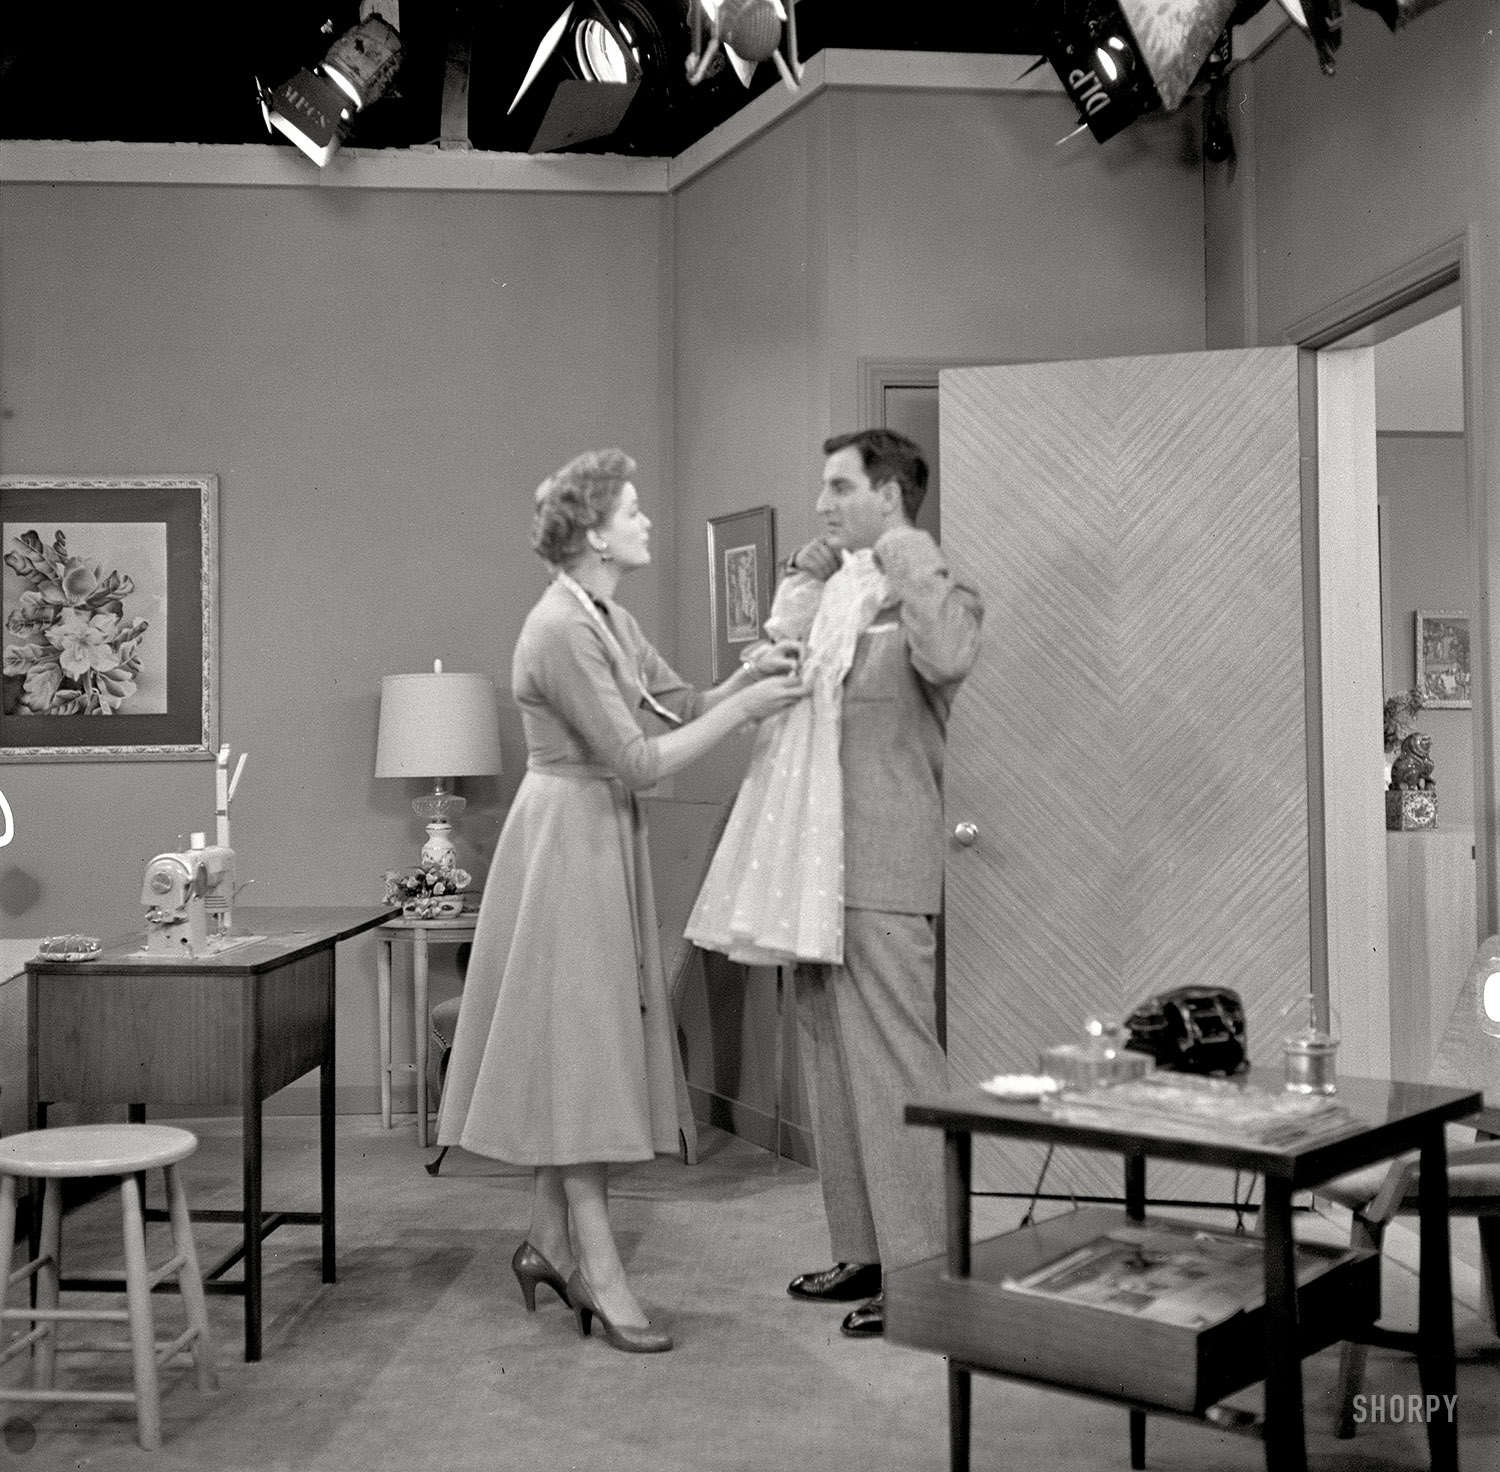 Danny Thomas and Marjorie Lord in 1957 rehearsing a scene for their TV show. Blurry photo by Robert Vose for the Look magazine article "Danny Thomas: He Has a Wonderful World All of His Own." View full size.